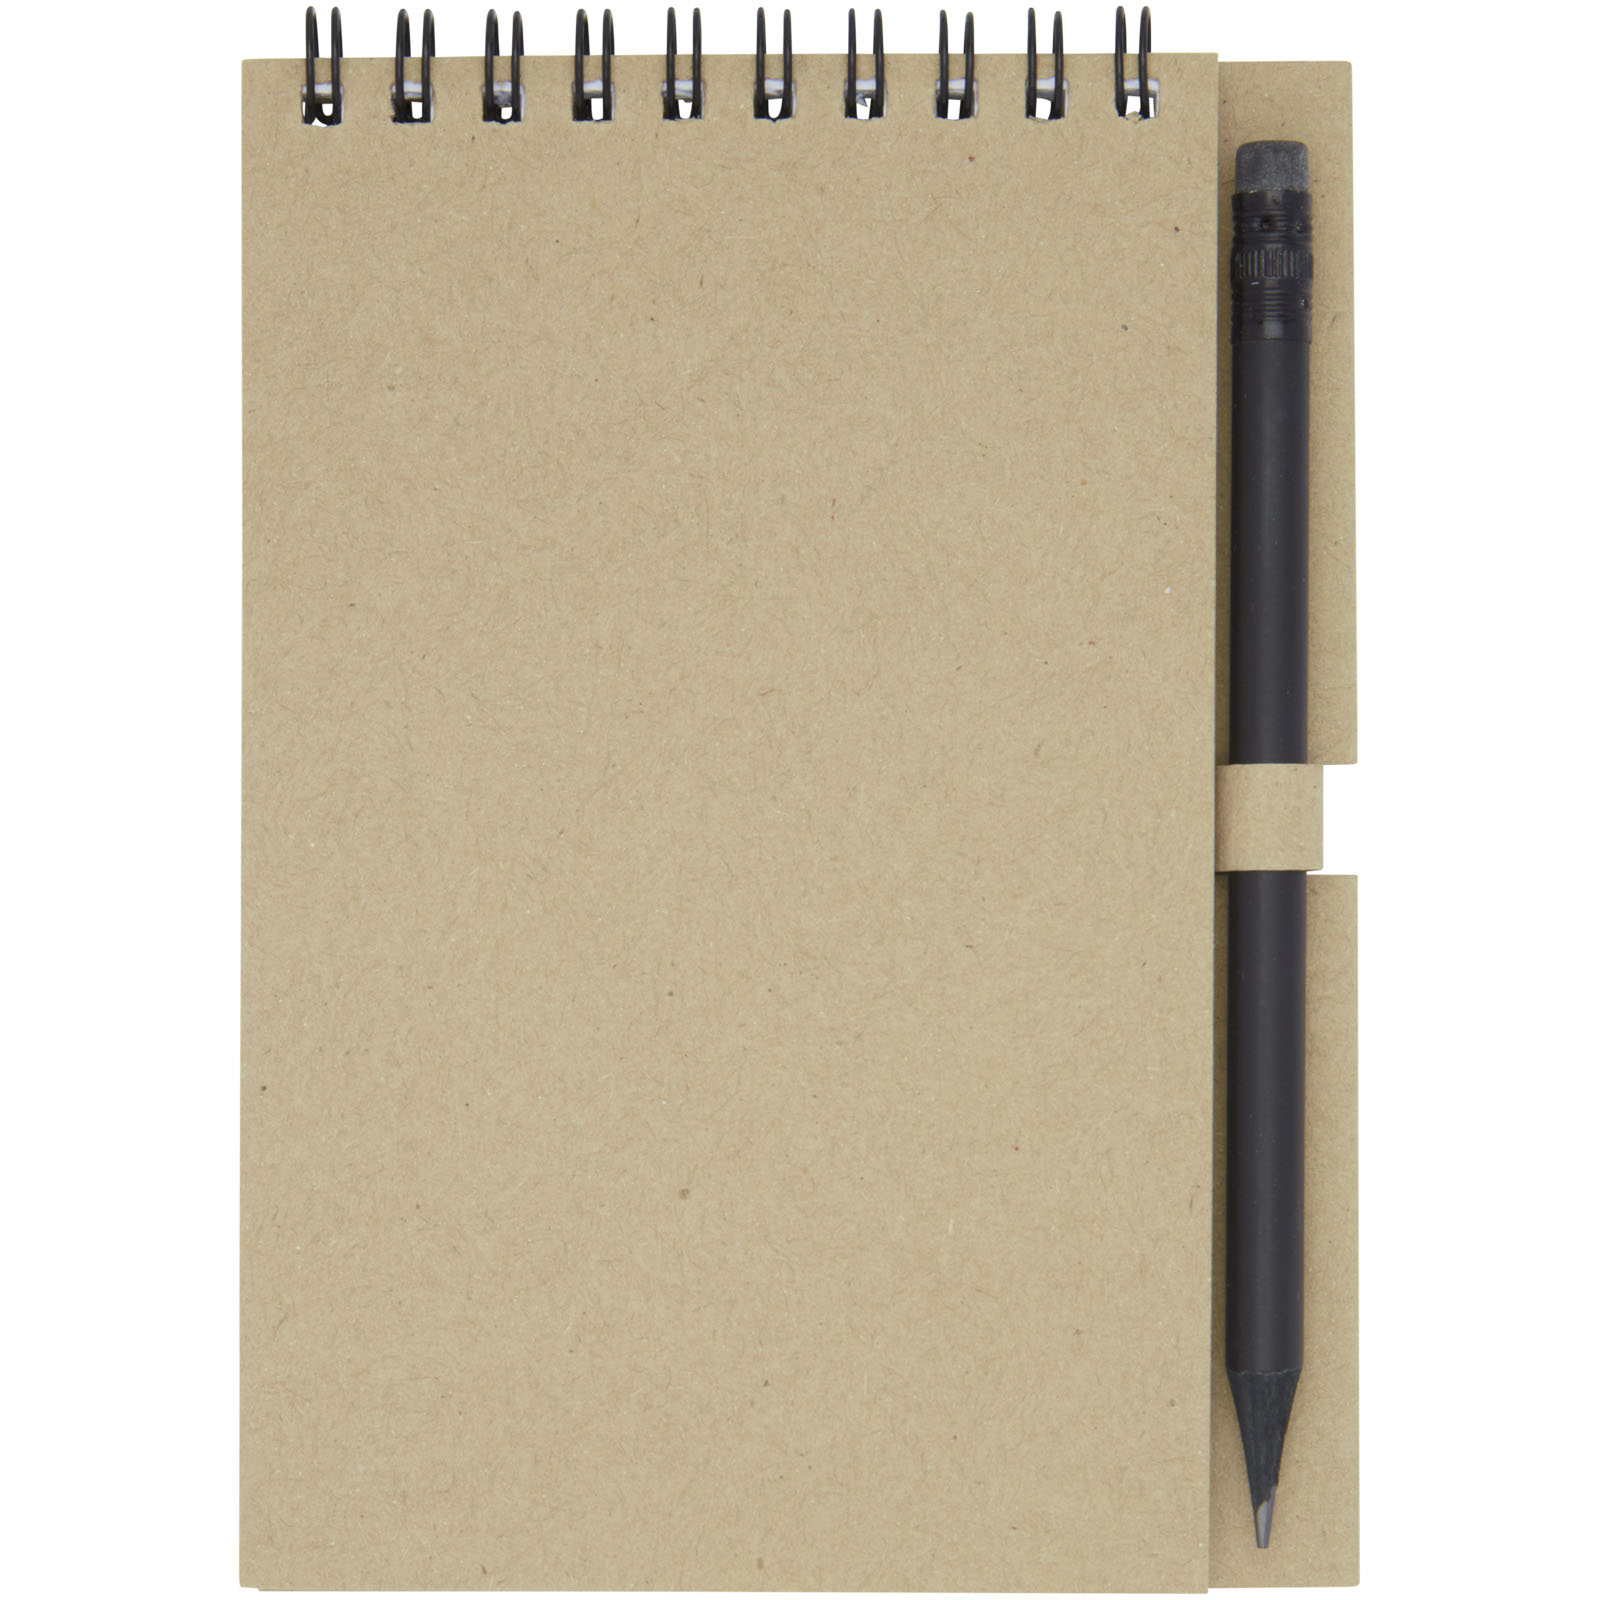 Advertising Notebooks - Luciano Eco wire notebook with pencil - small - 1